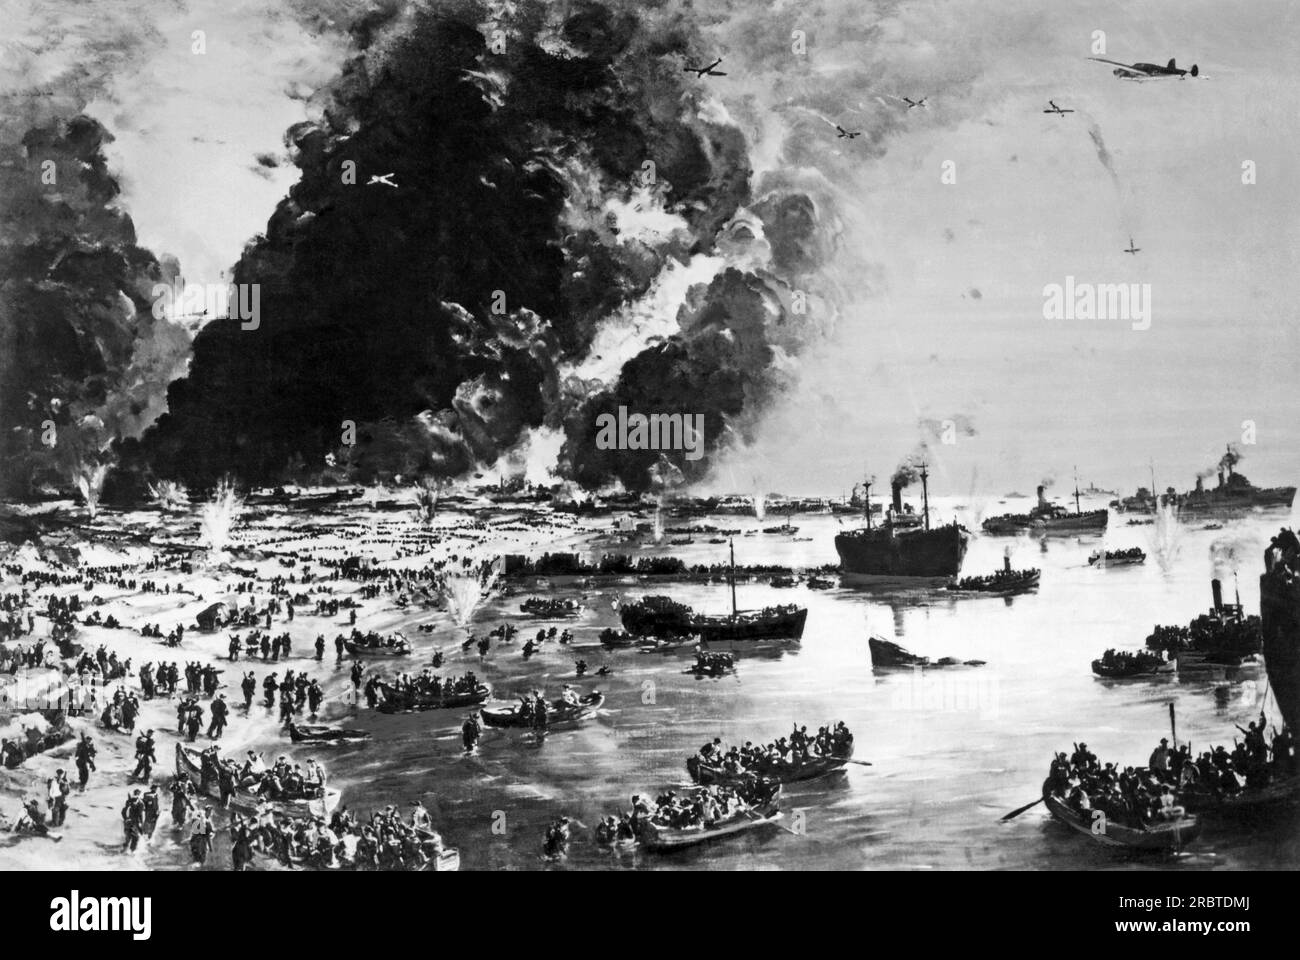 Dunkirk, France: c. June 1, 1940. The Evacuation of Dunkirk as painted ...